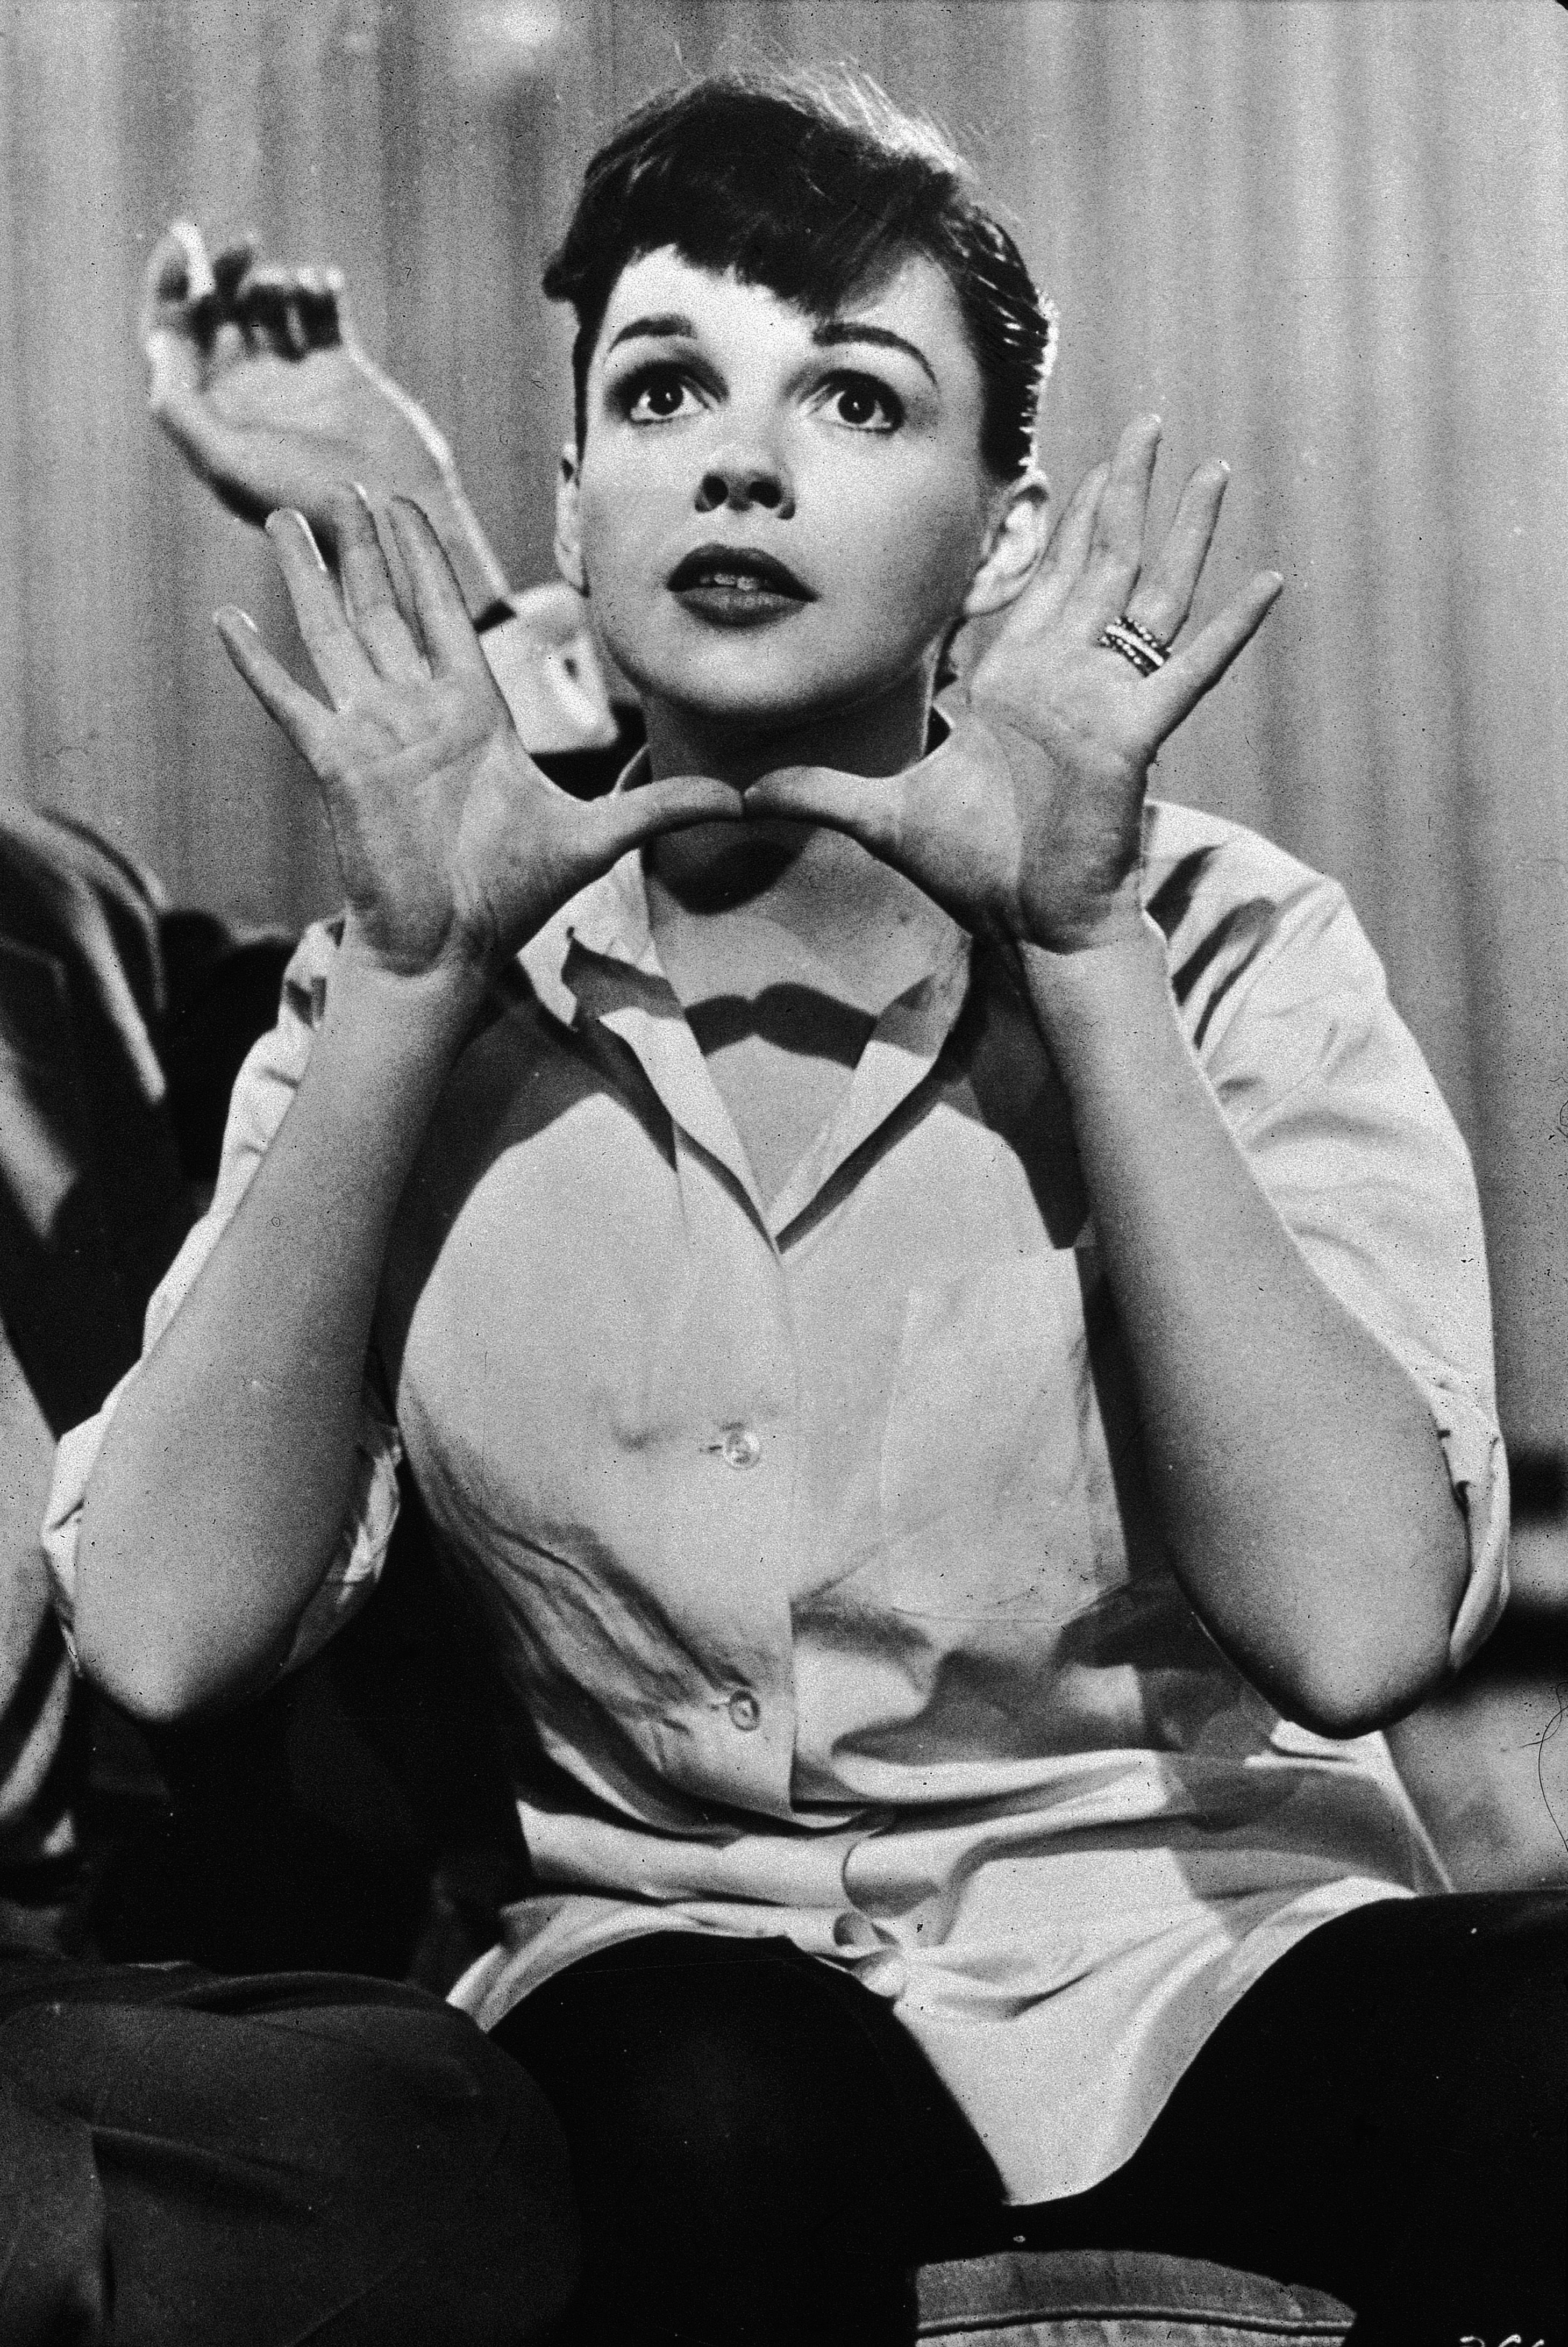 Judy Garland (1922-1969) holds her hands up near her face, circa 1950s. | Source: Getty Images